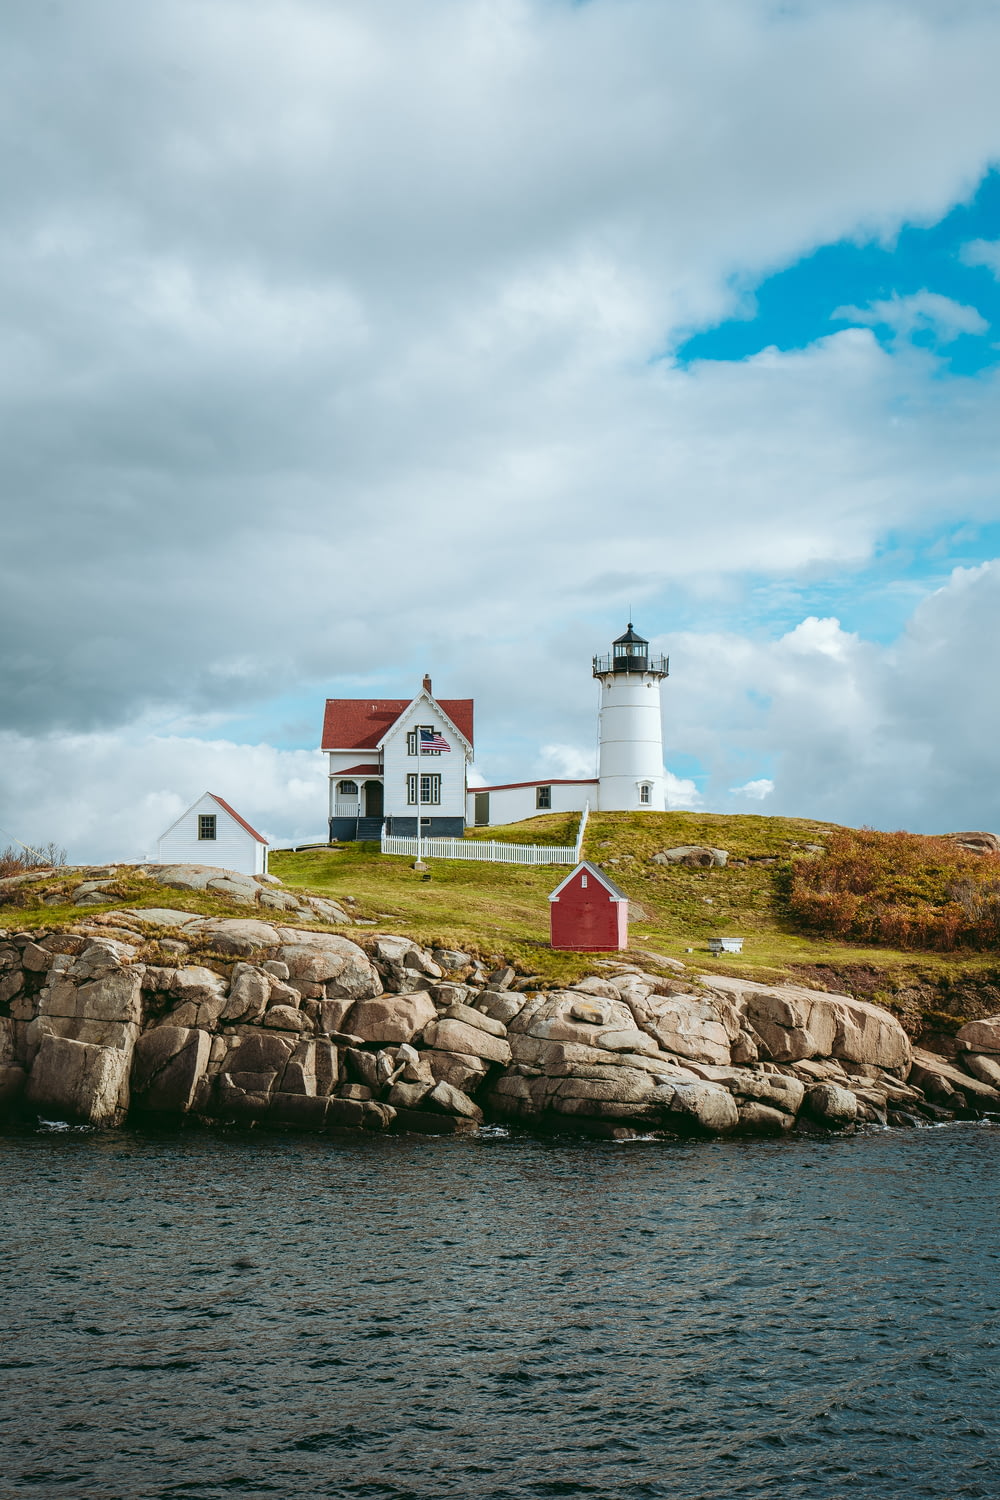 a red and white lighthouse on a rocky island